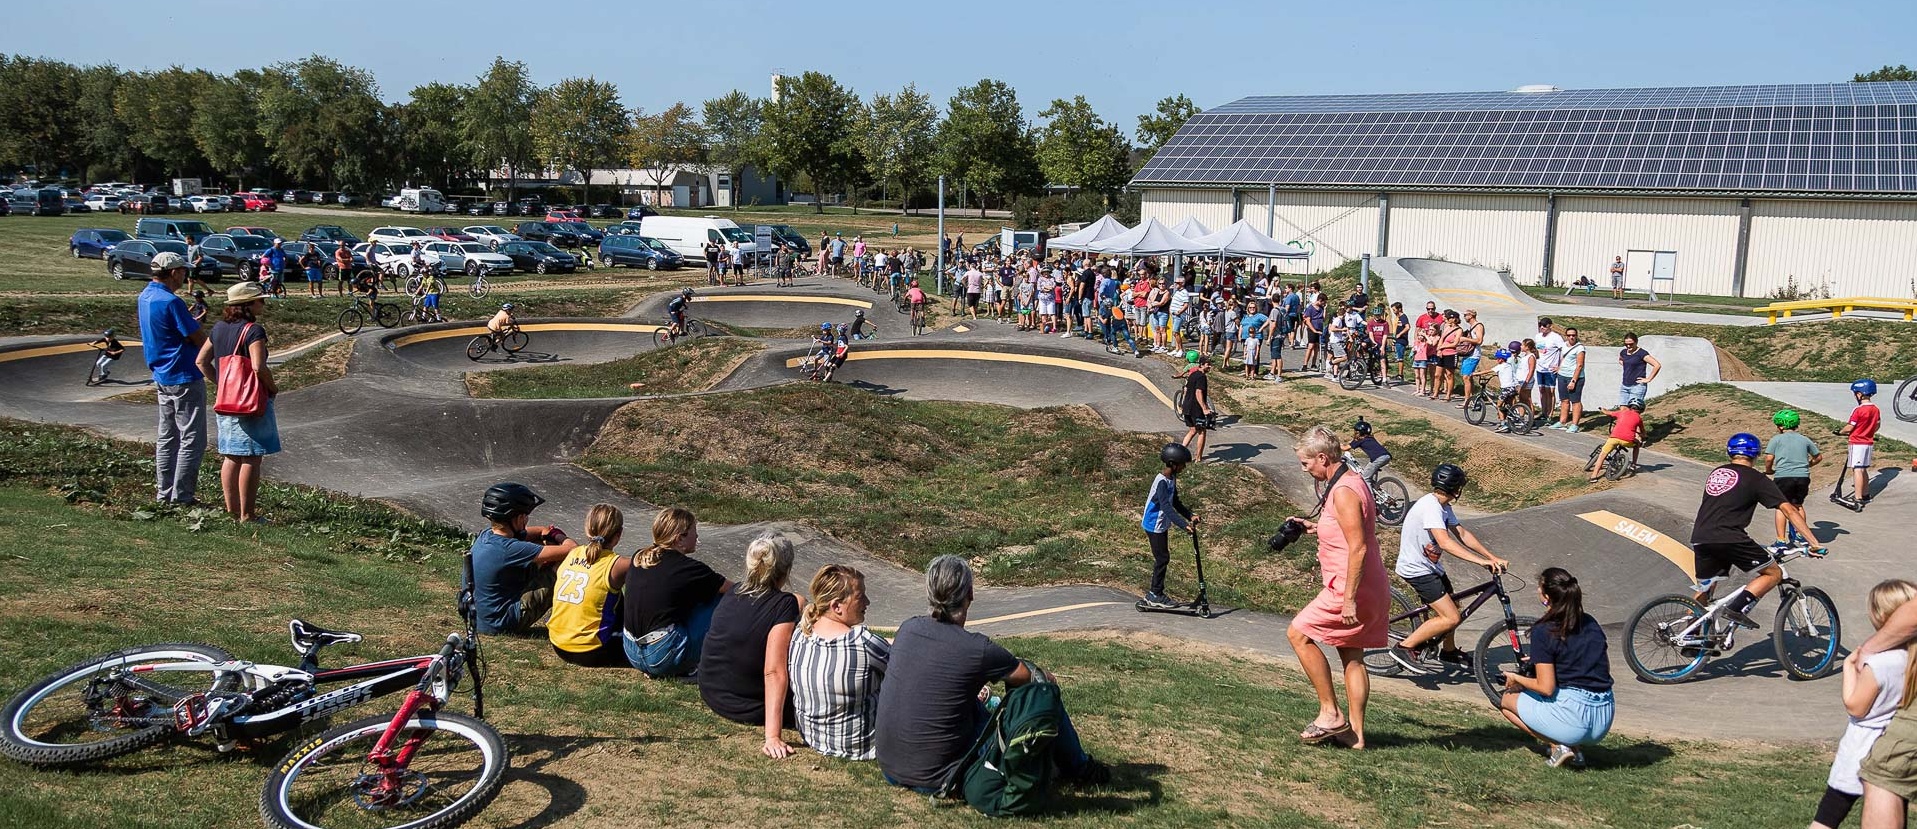 Pump track with a large audience for the opening of the facility.